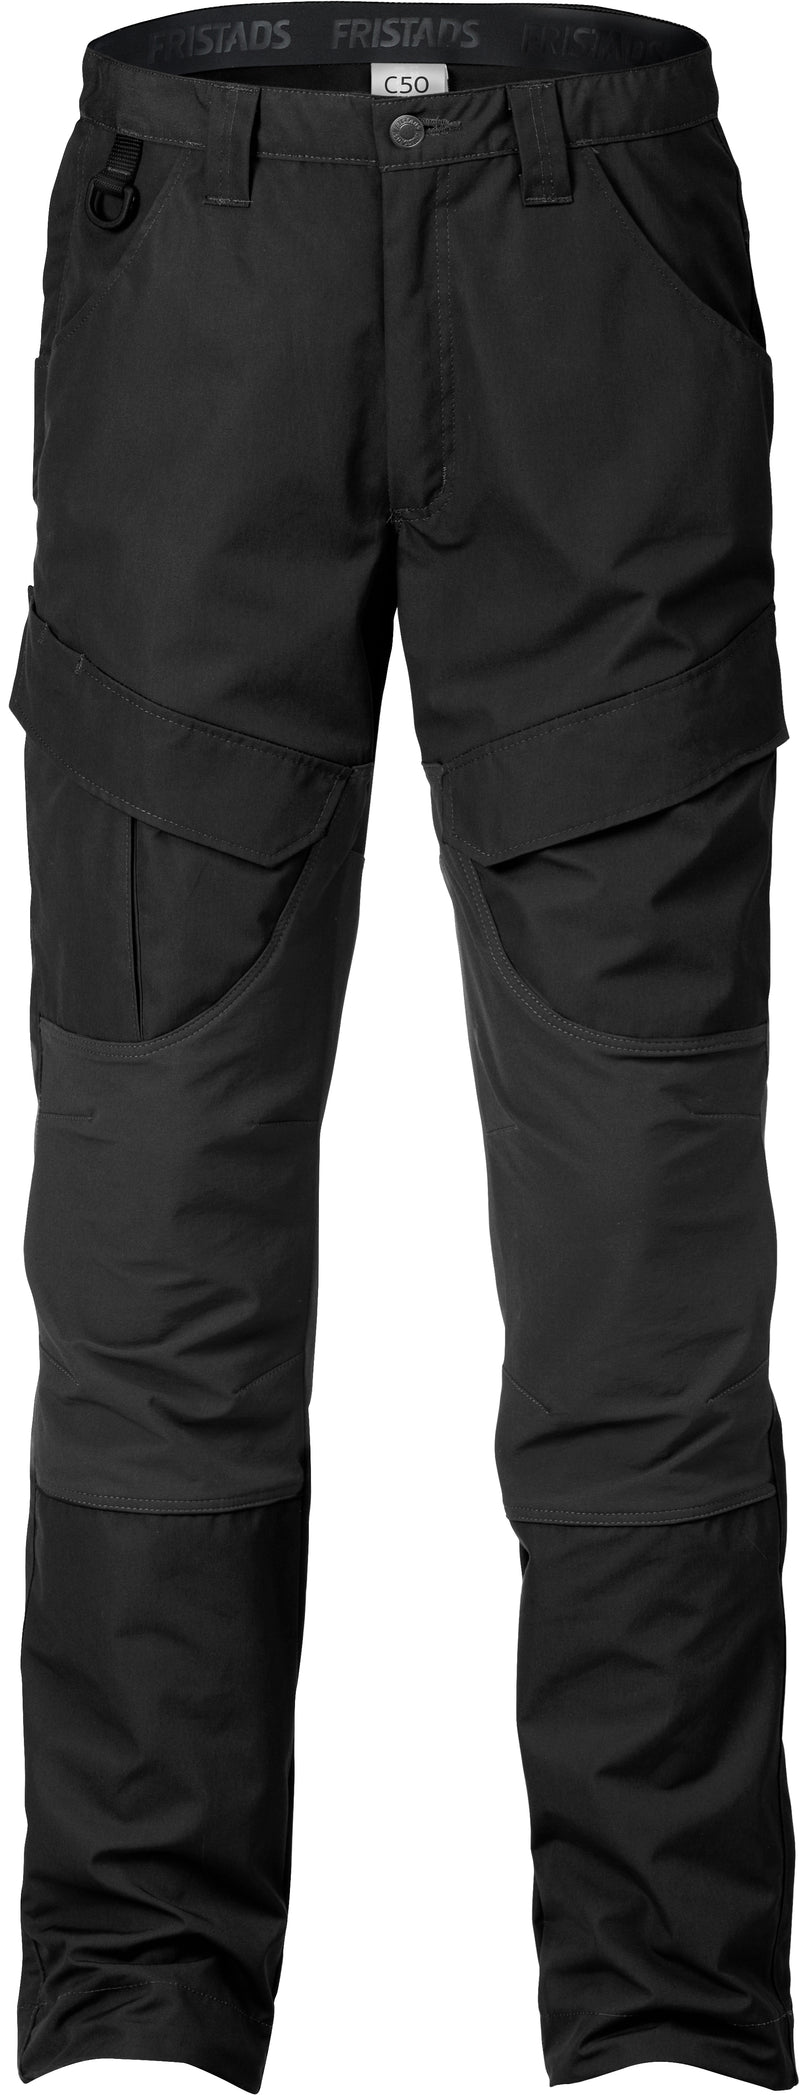 Load image into Gallery viewer, Trousers FRISTADS SERVICE STRETCH TROUSERS 2526 PLW
